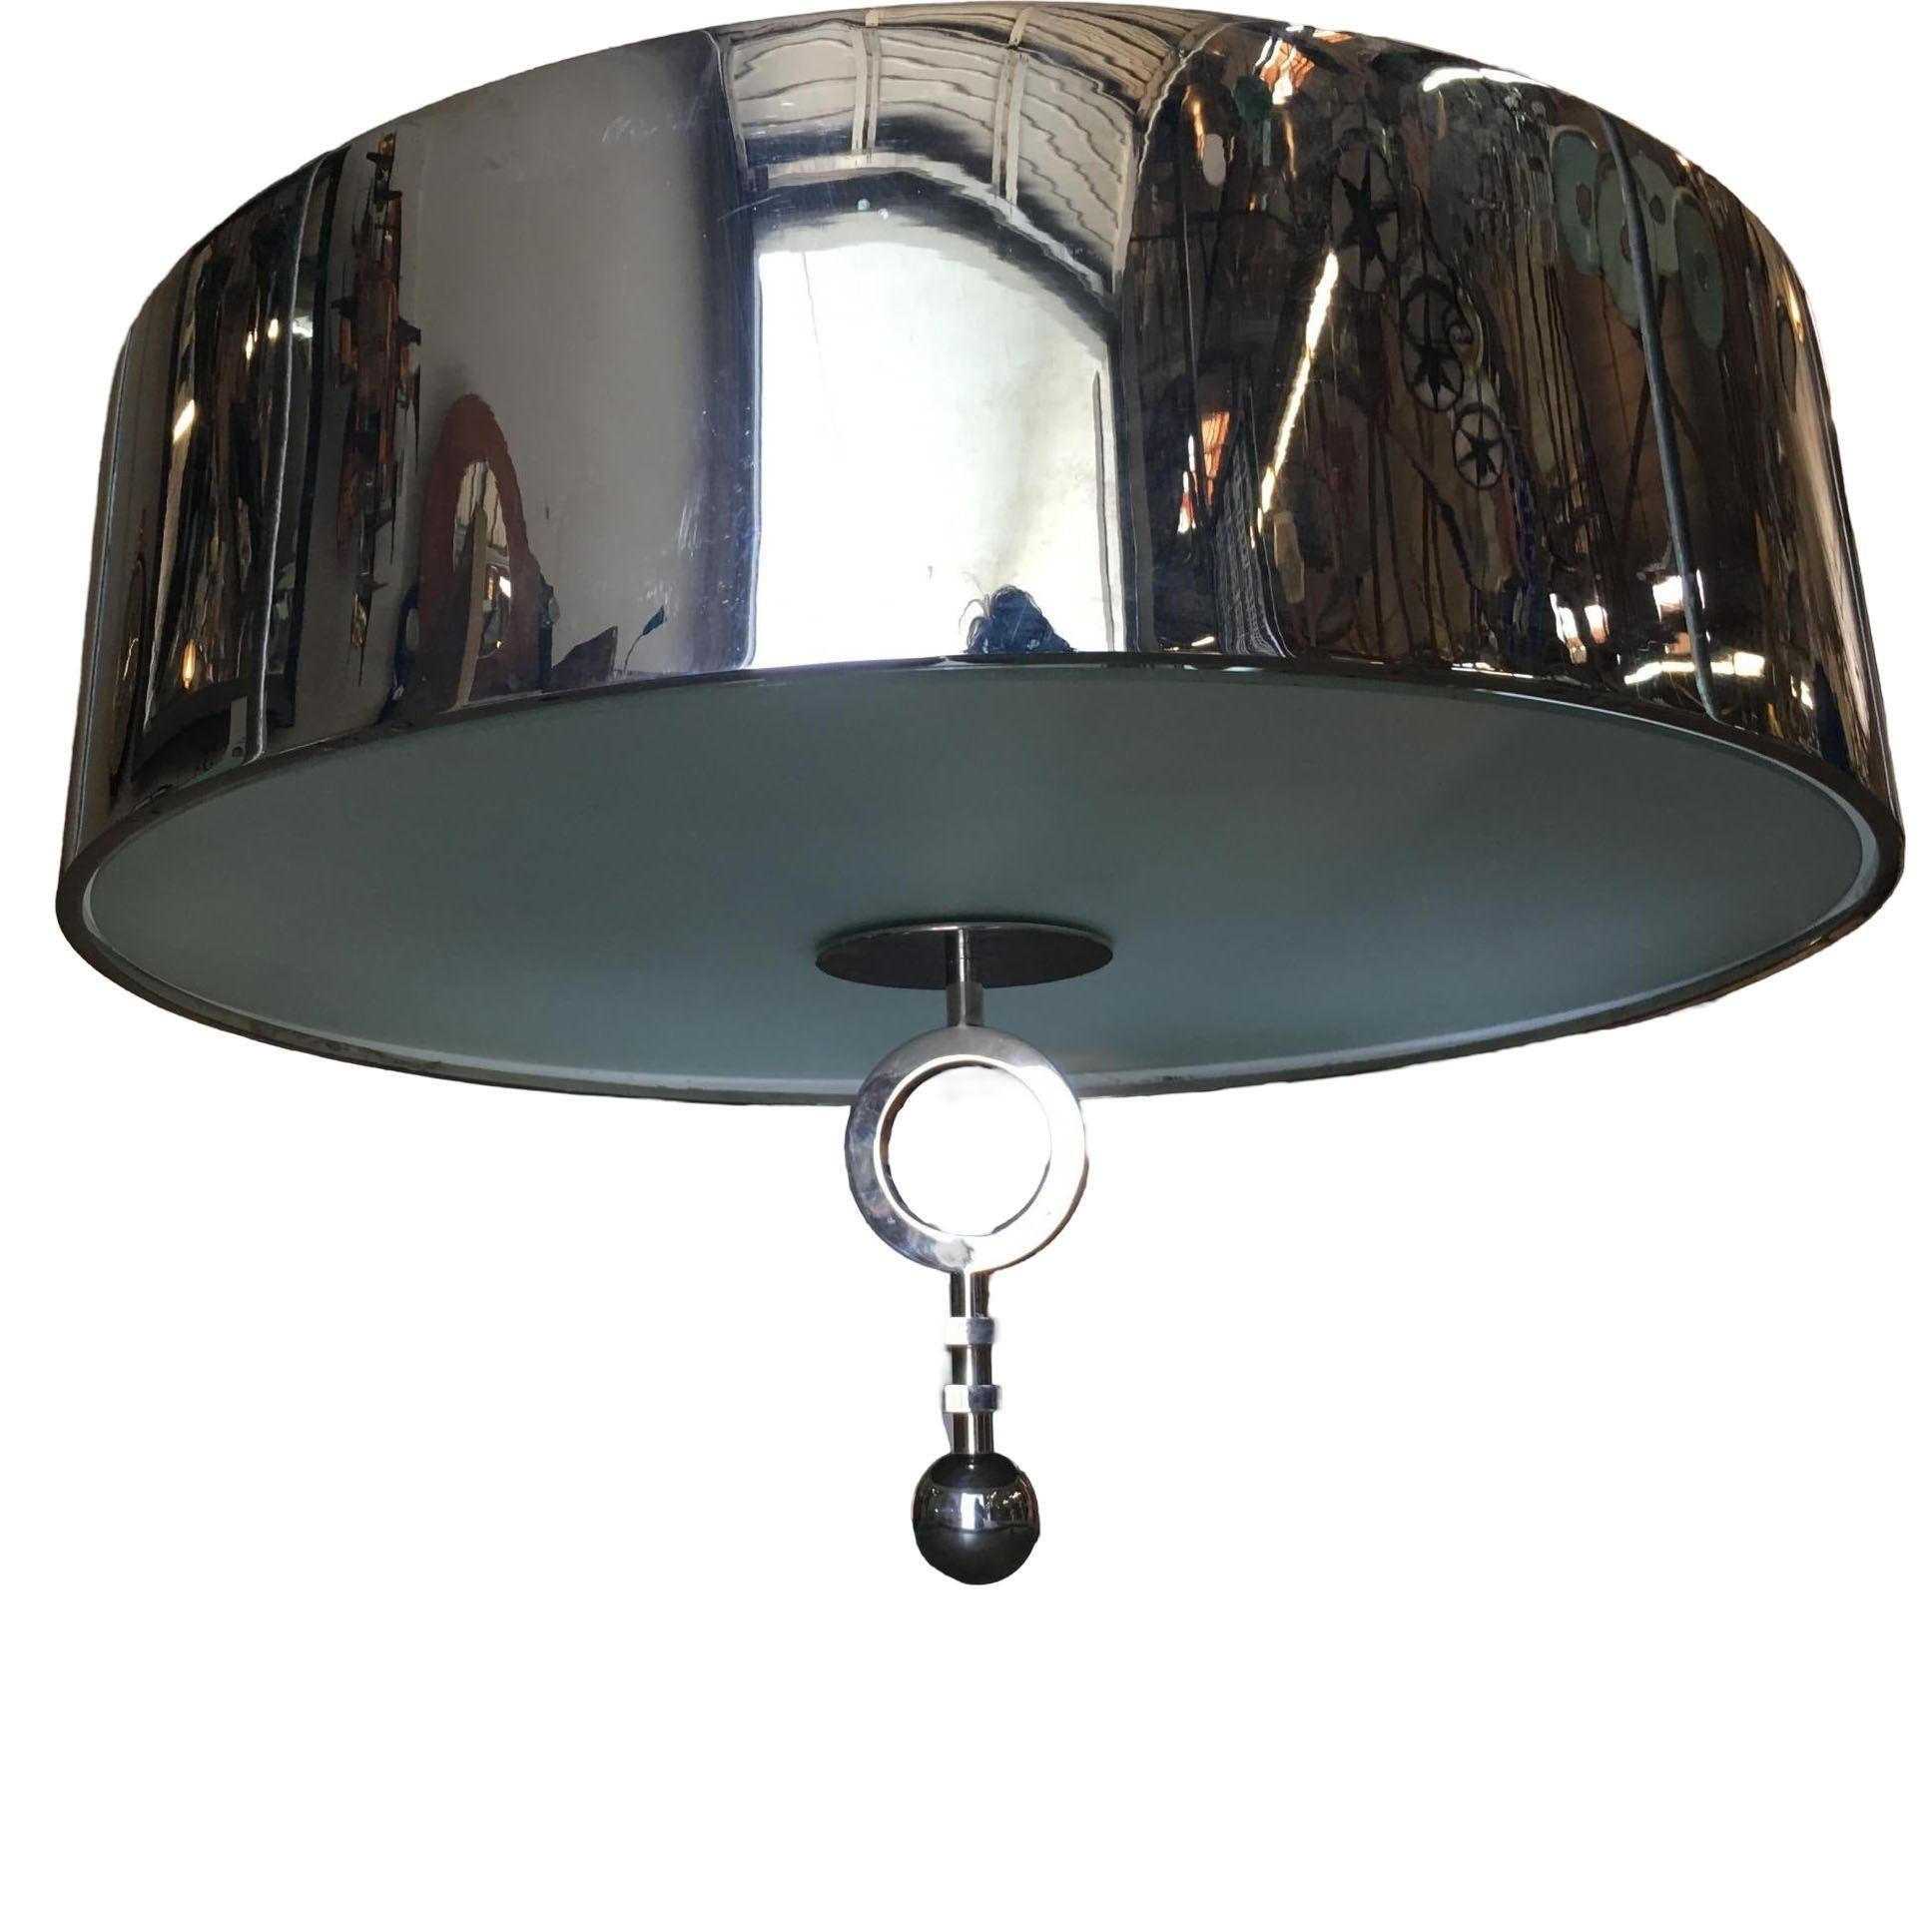 Chrome Drum Chandelier with Frosted Glass Shade In Excellent Condition For Sale In Van Nuys, CA